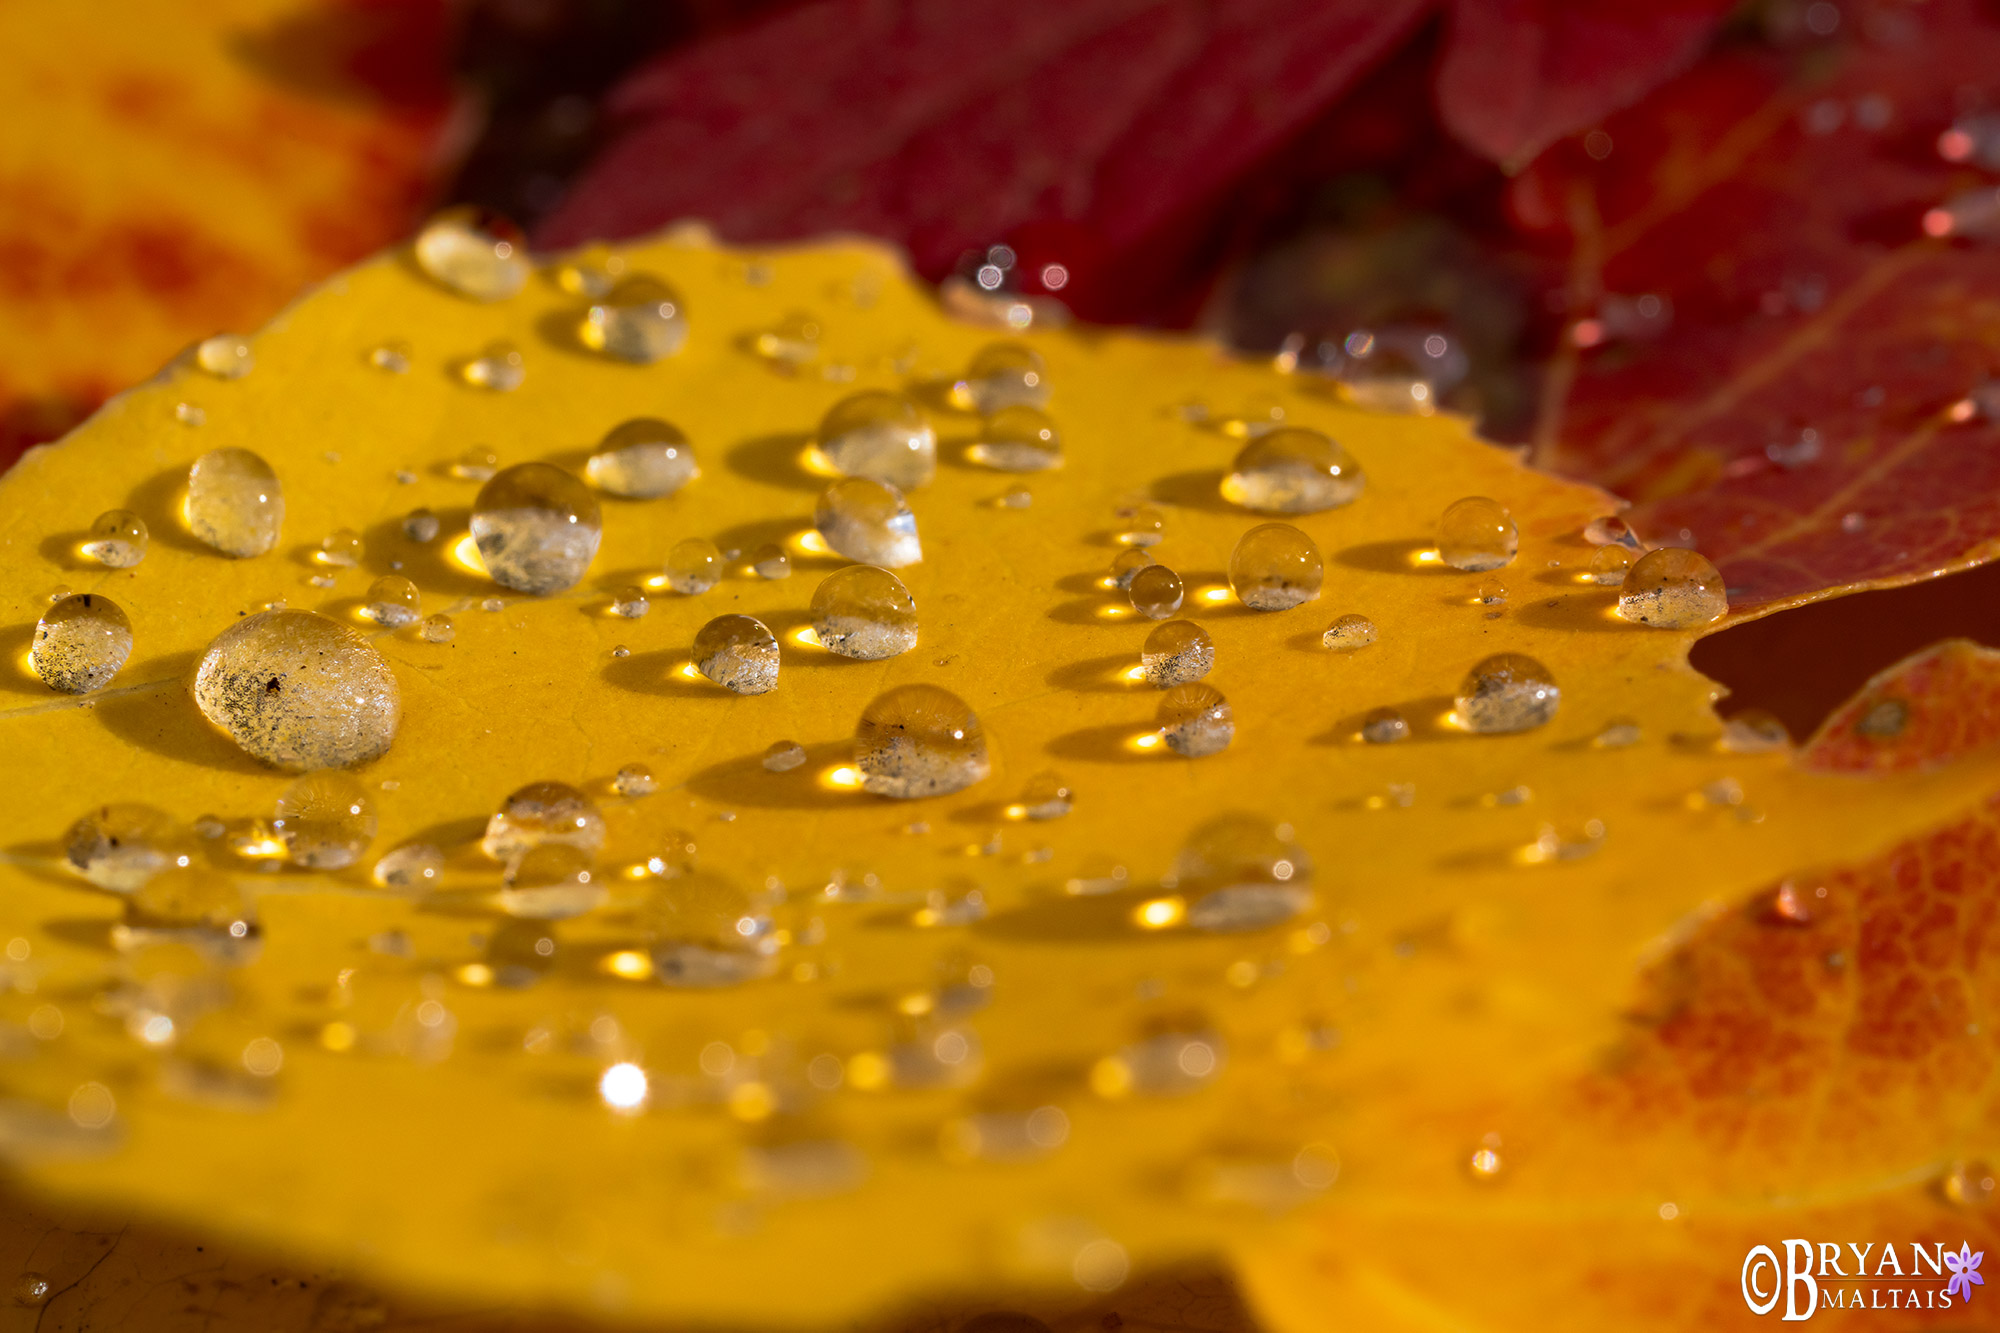 fall colors leaves with water dropplets